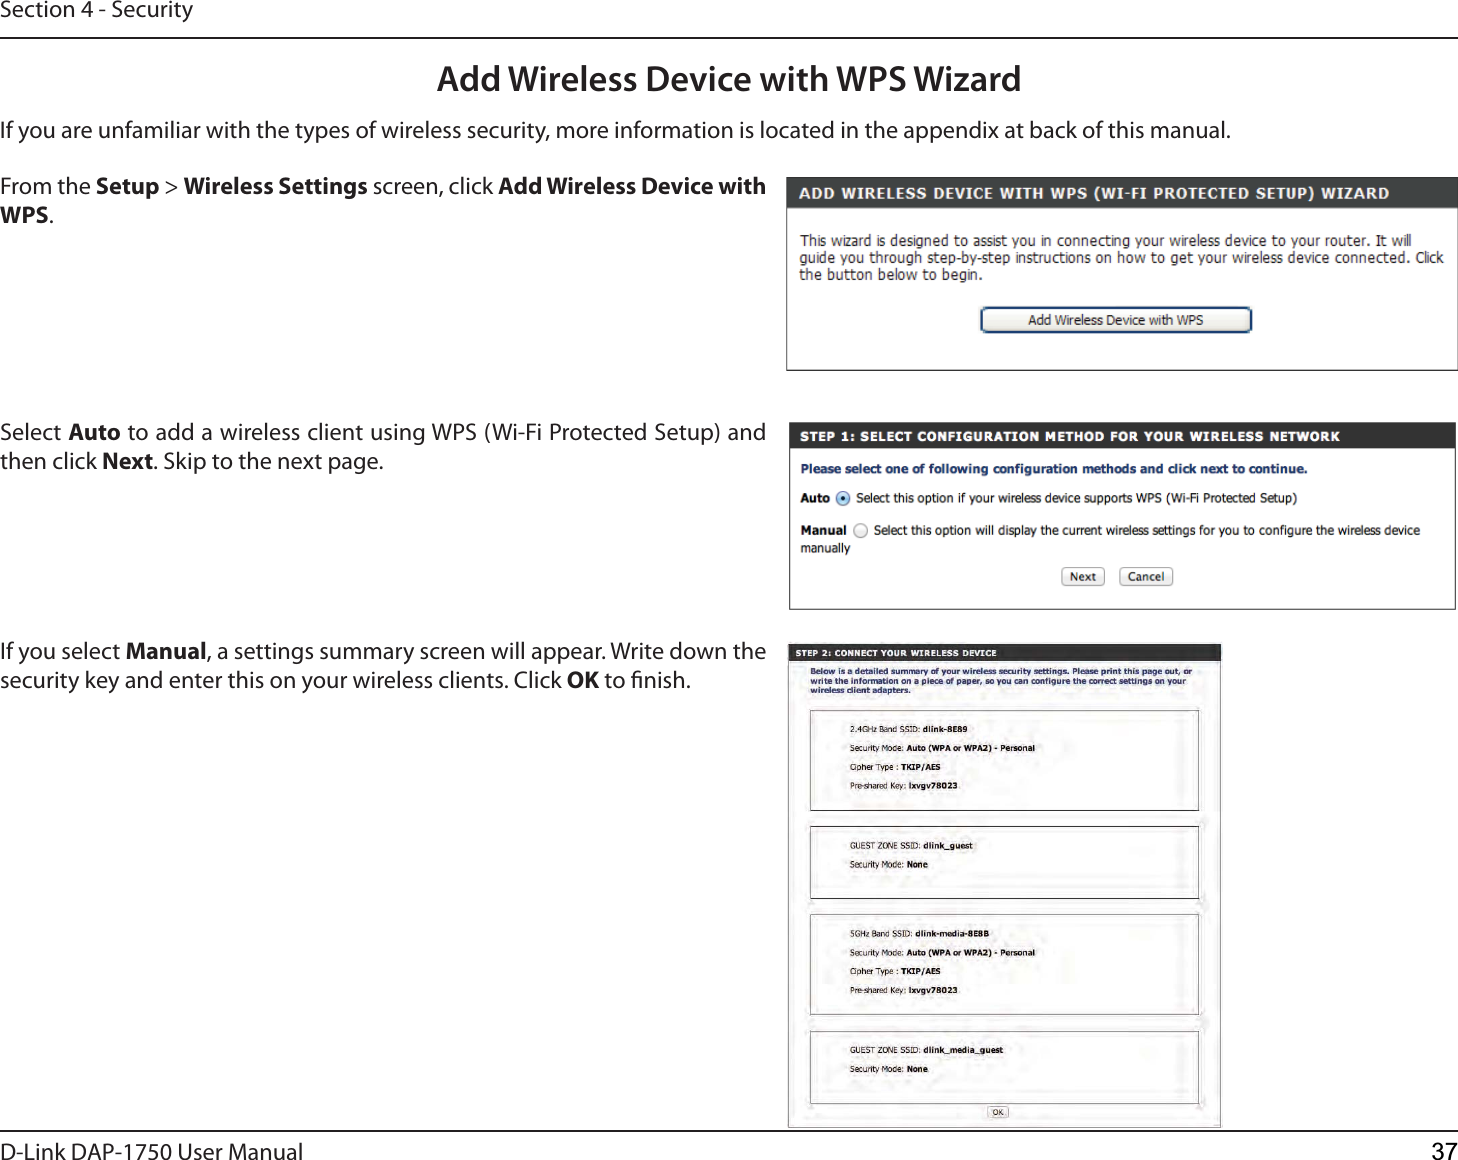 D-Link %&quot;1 User ManualSection 4 - SecurityFrom the Setup &gt; Wireless Settings screen, click Add Wireless Device with WPS.Add Wireless Device with WPS WizardIf you select Manual, a settings summary screen will appear. Write down the security key and enter this on your wireless clients. Click OK to nish.Select Auto to add a wireless client using WPS (Wi-Fi Protected Setup) and then click Next. Skip to the next page. If you are unfamiliar with the types of wireless security, more information is located in the appendix at back of this manual.37